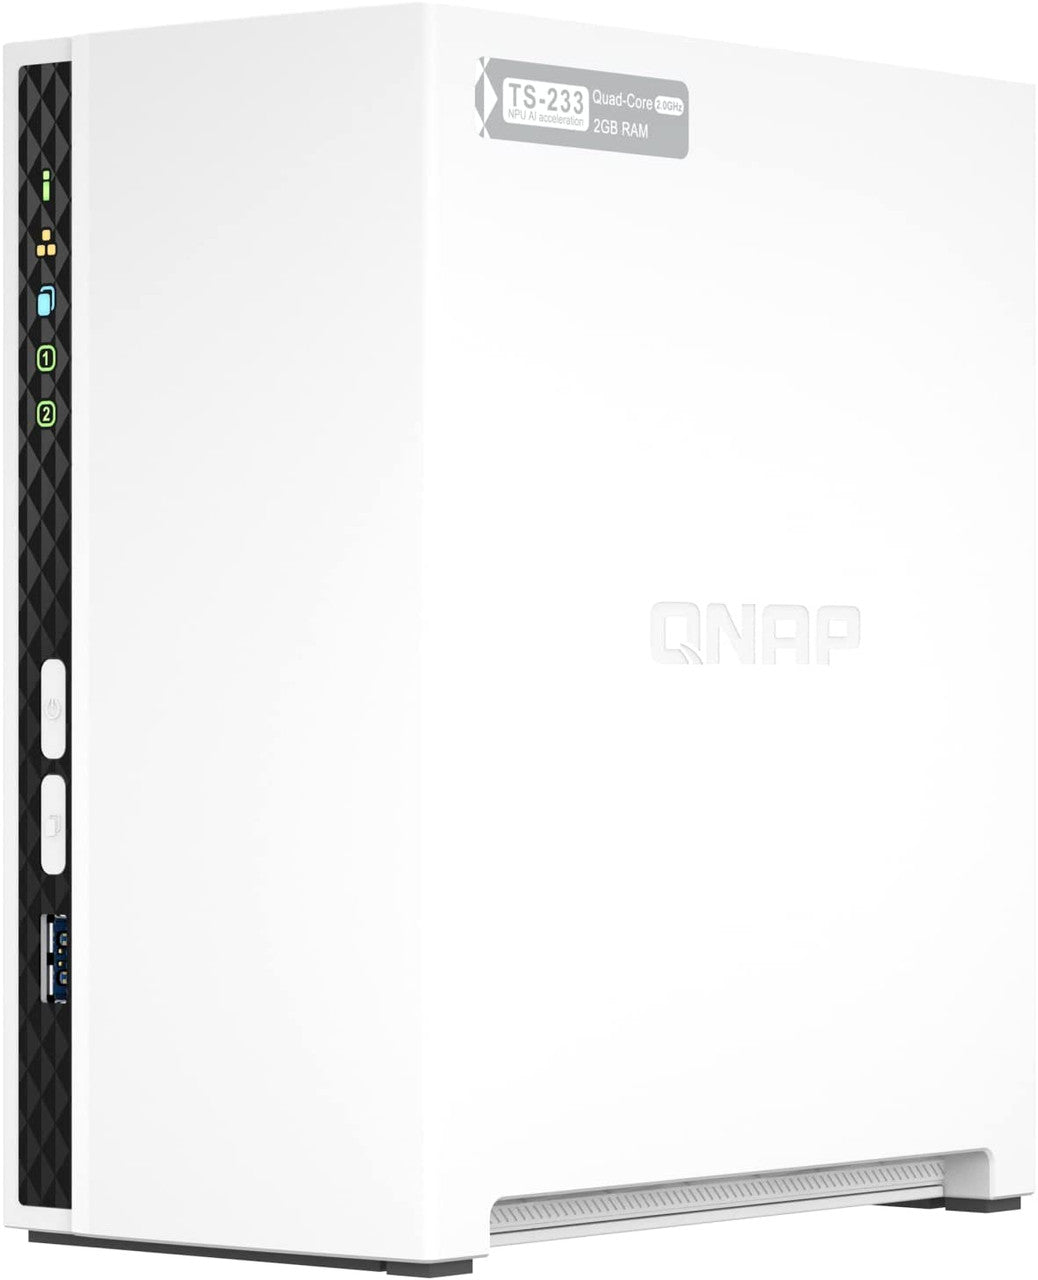 QNAP TS-233 2-Bay Desktop NAS with a 20TB (2 x 10TB) of Western Digital Red Plus Drives Fully Assembled and Tested